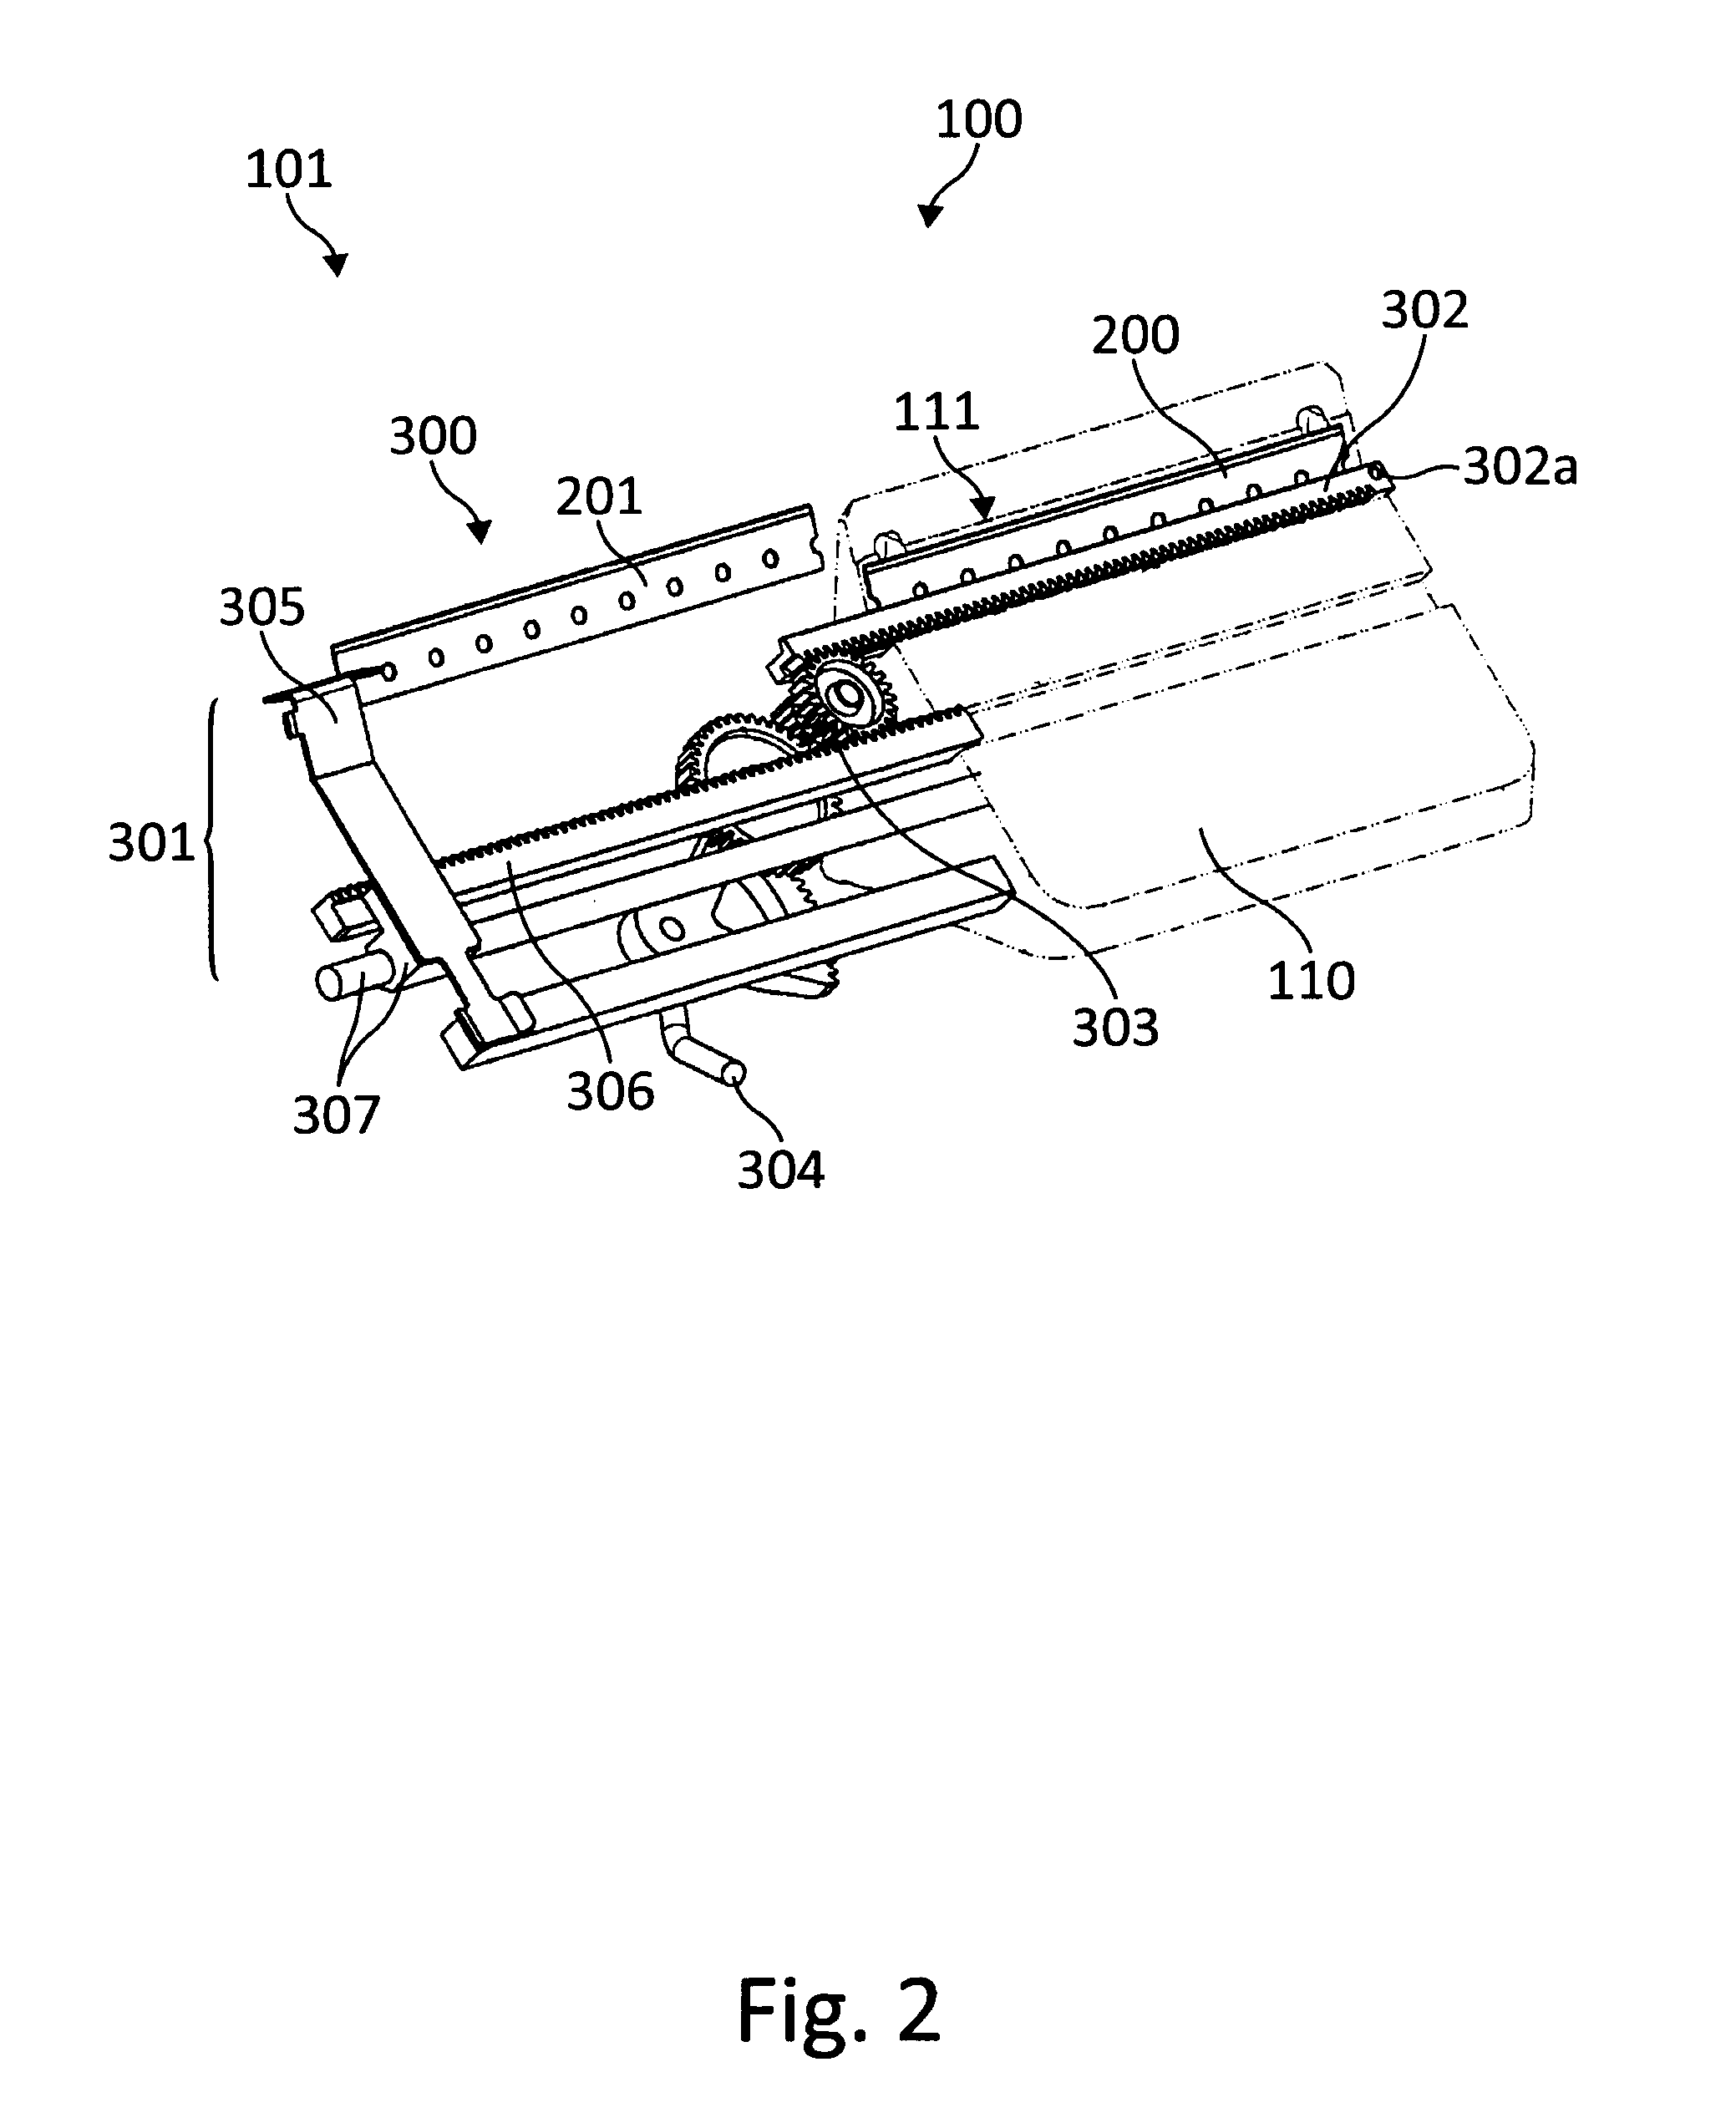 Knife holder having a blade changing apparatus